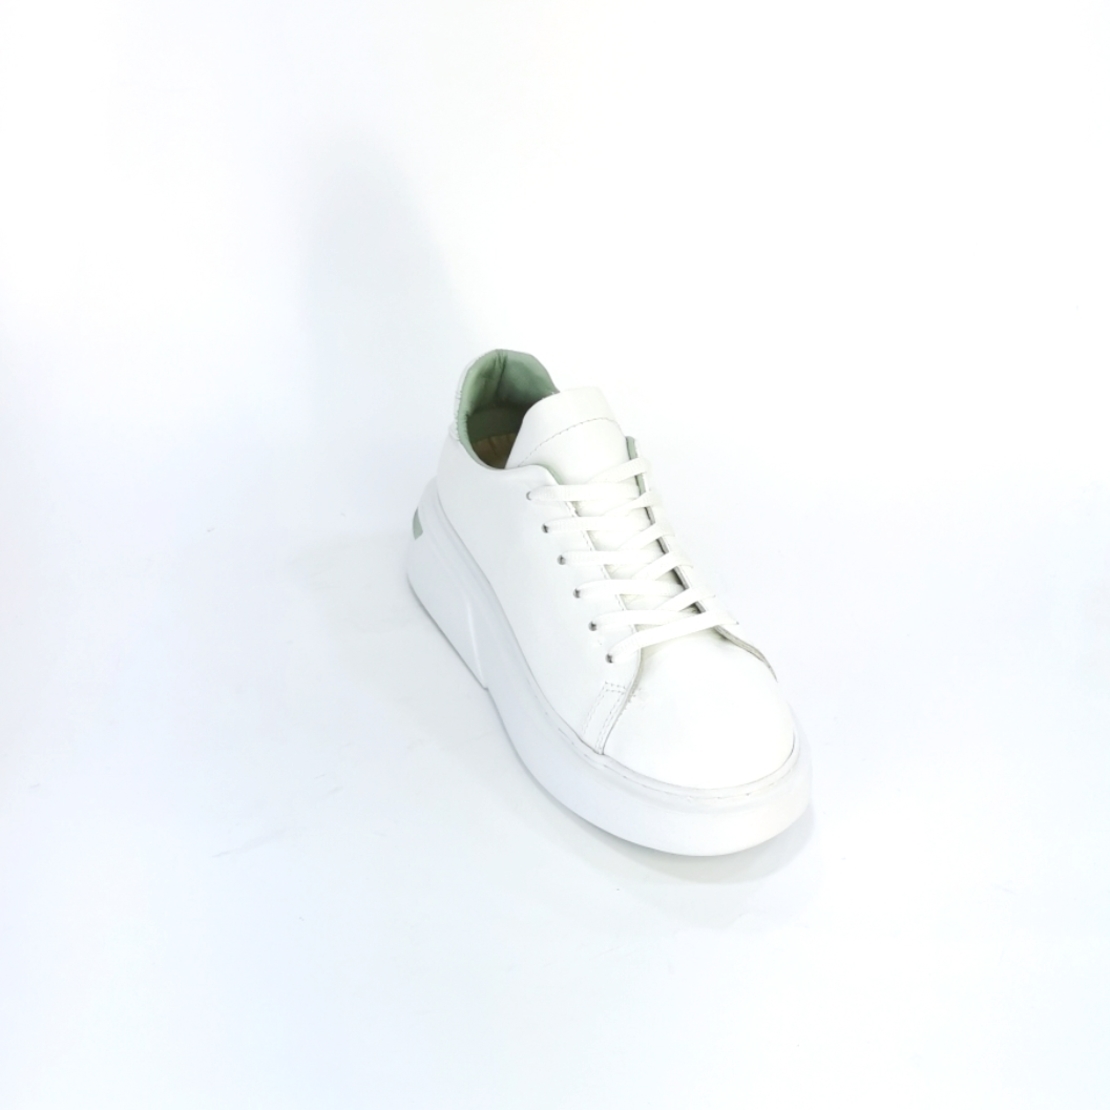 Women's sneaker made of natural leather in white color with anatomical insole/7012